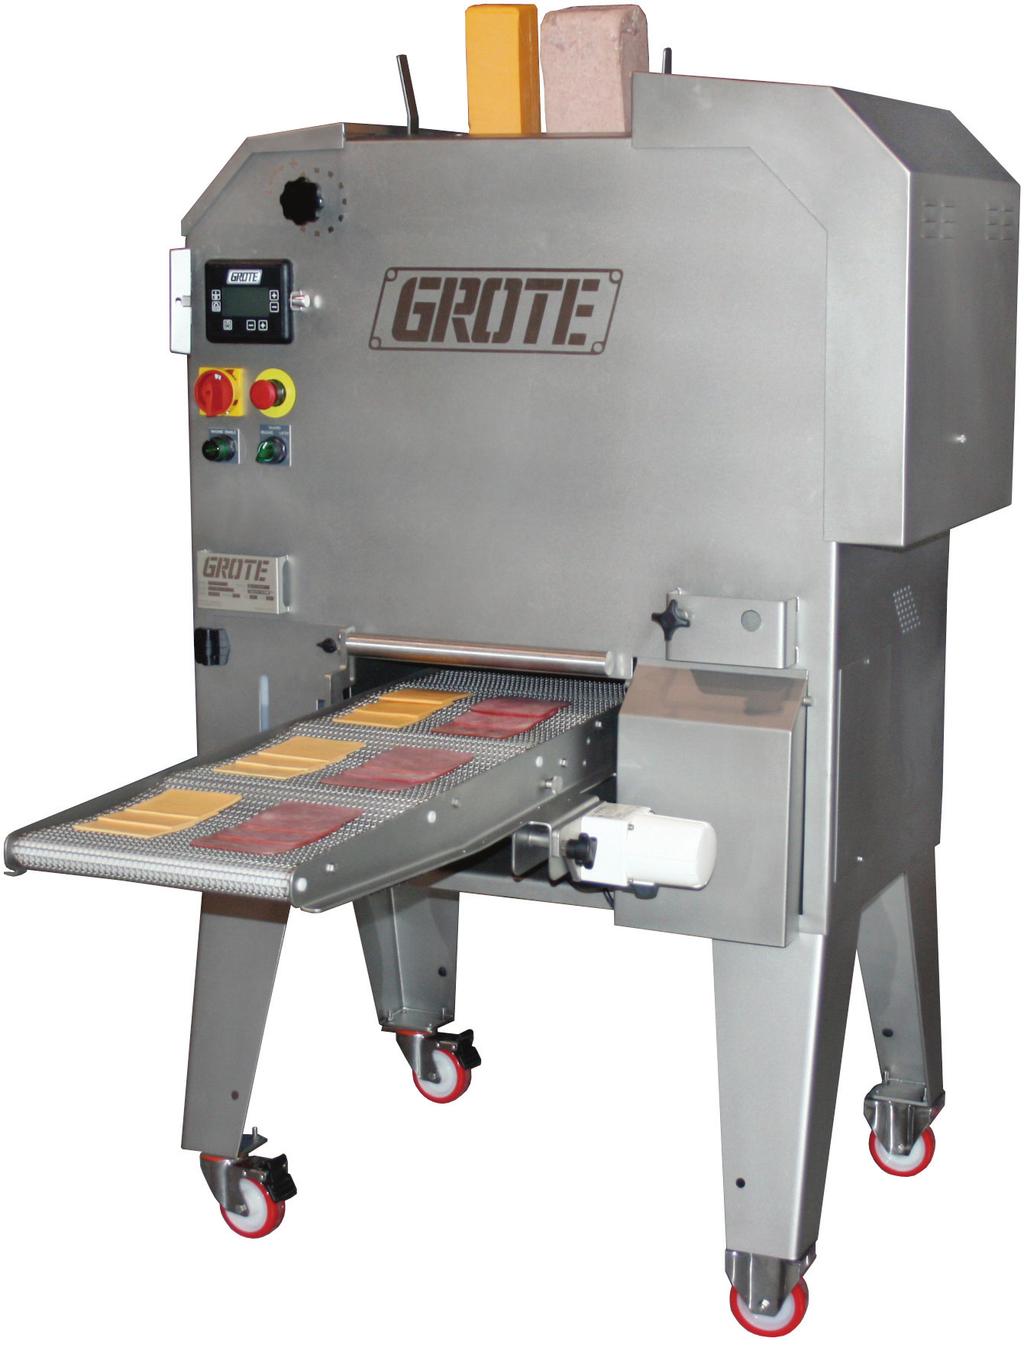 613-VS2 MULTI SLICER 320692 Driven by innovation Ideal for the food service industry.